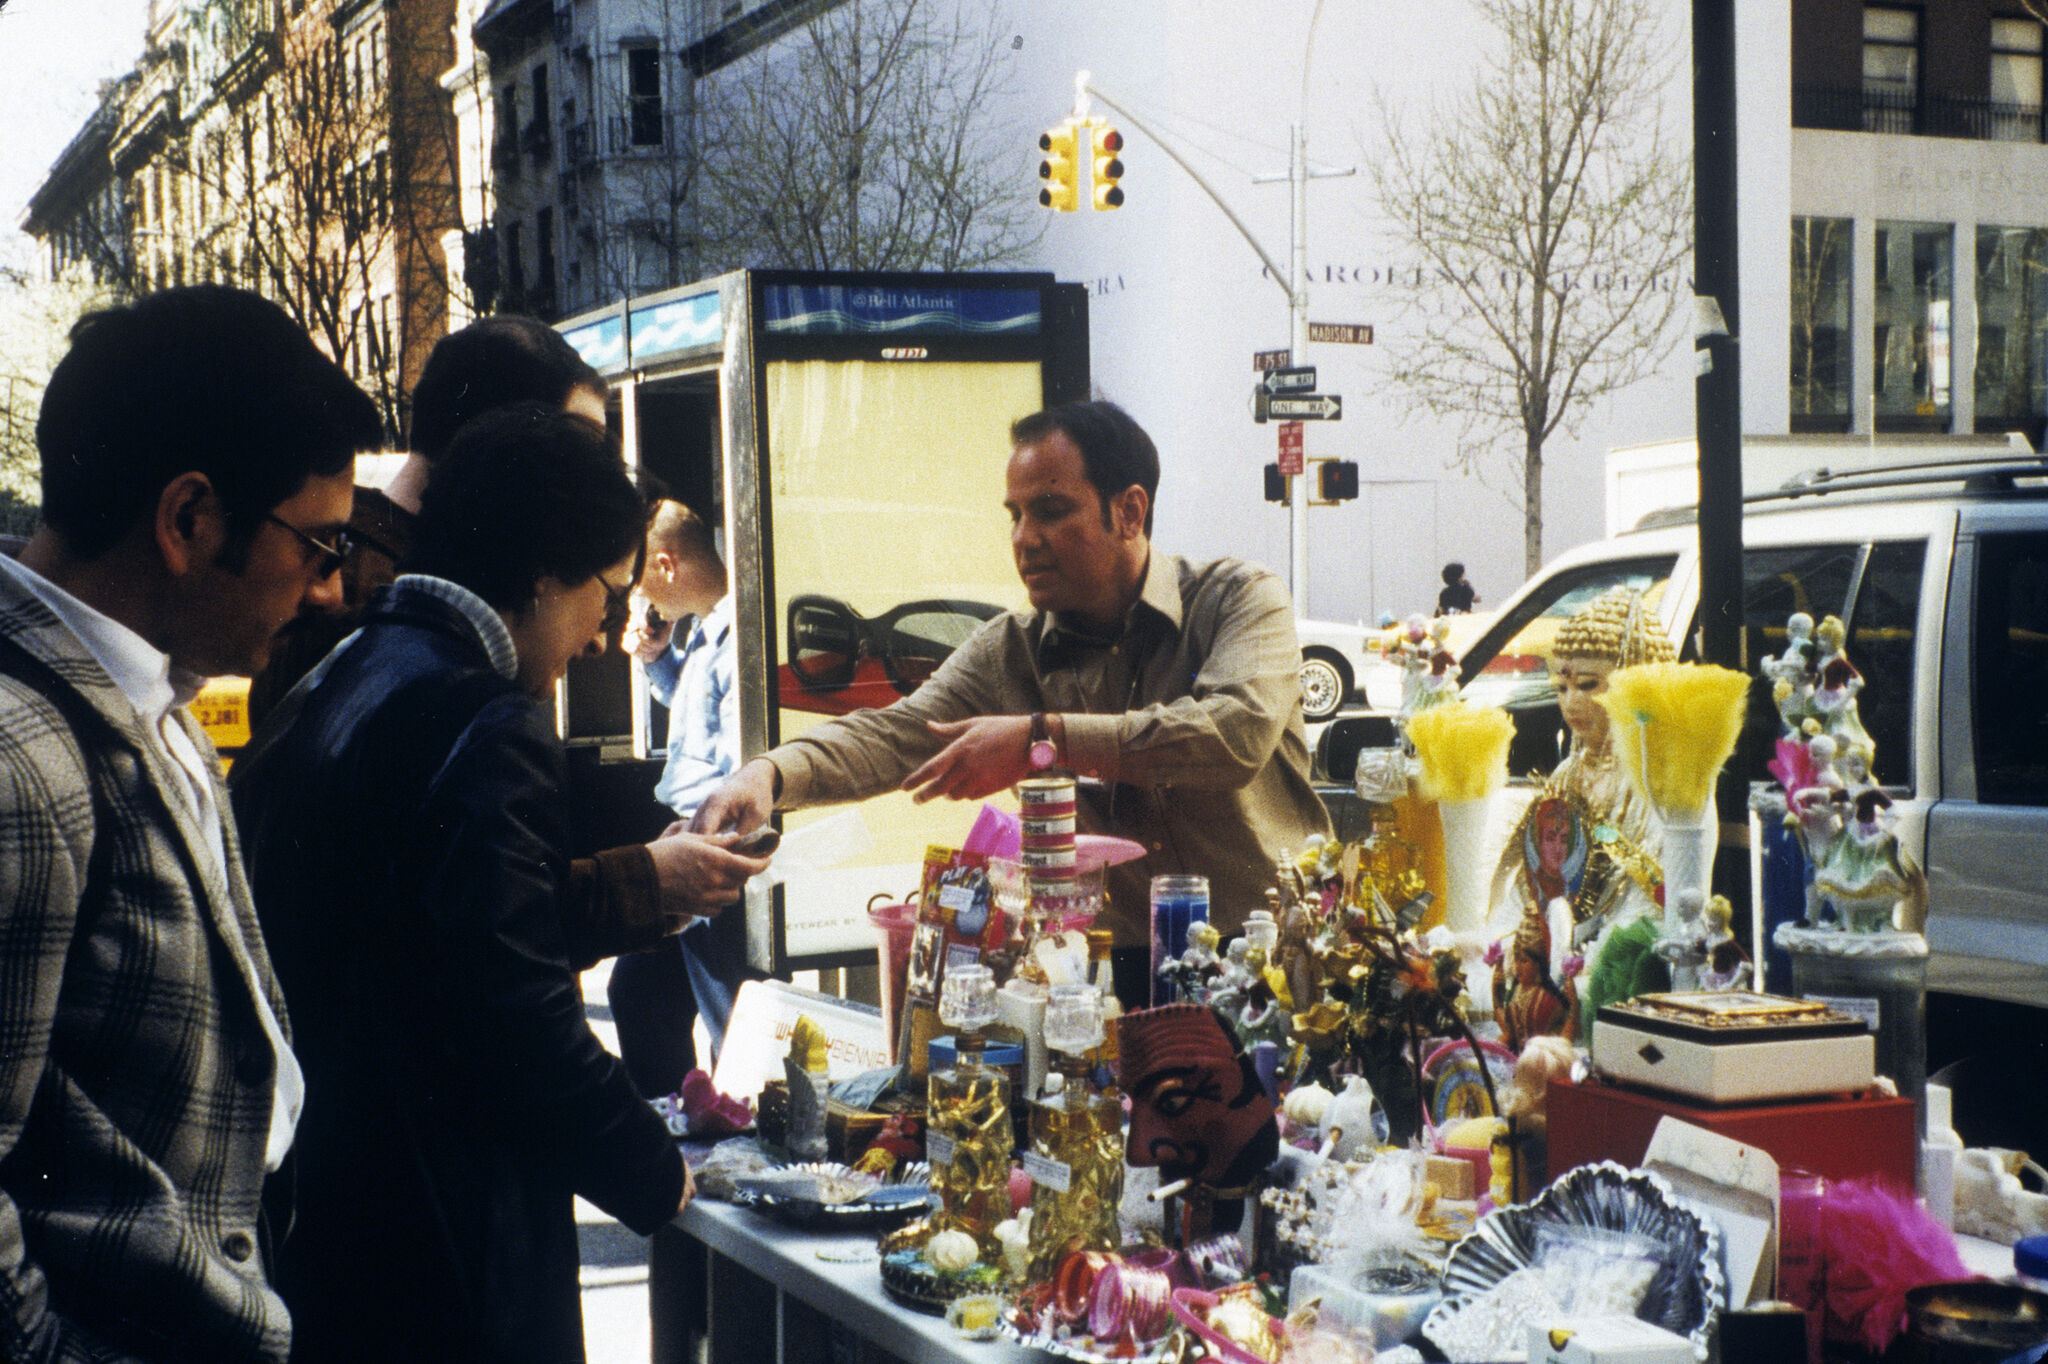 A salesman attending to customers over a table of miscellaneous objects on a New York City street.